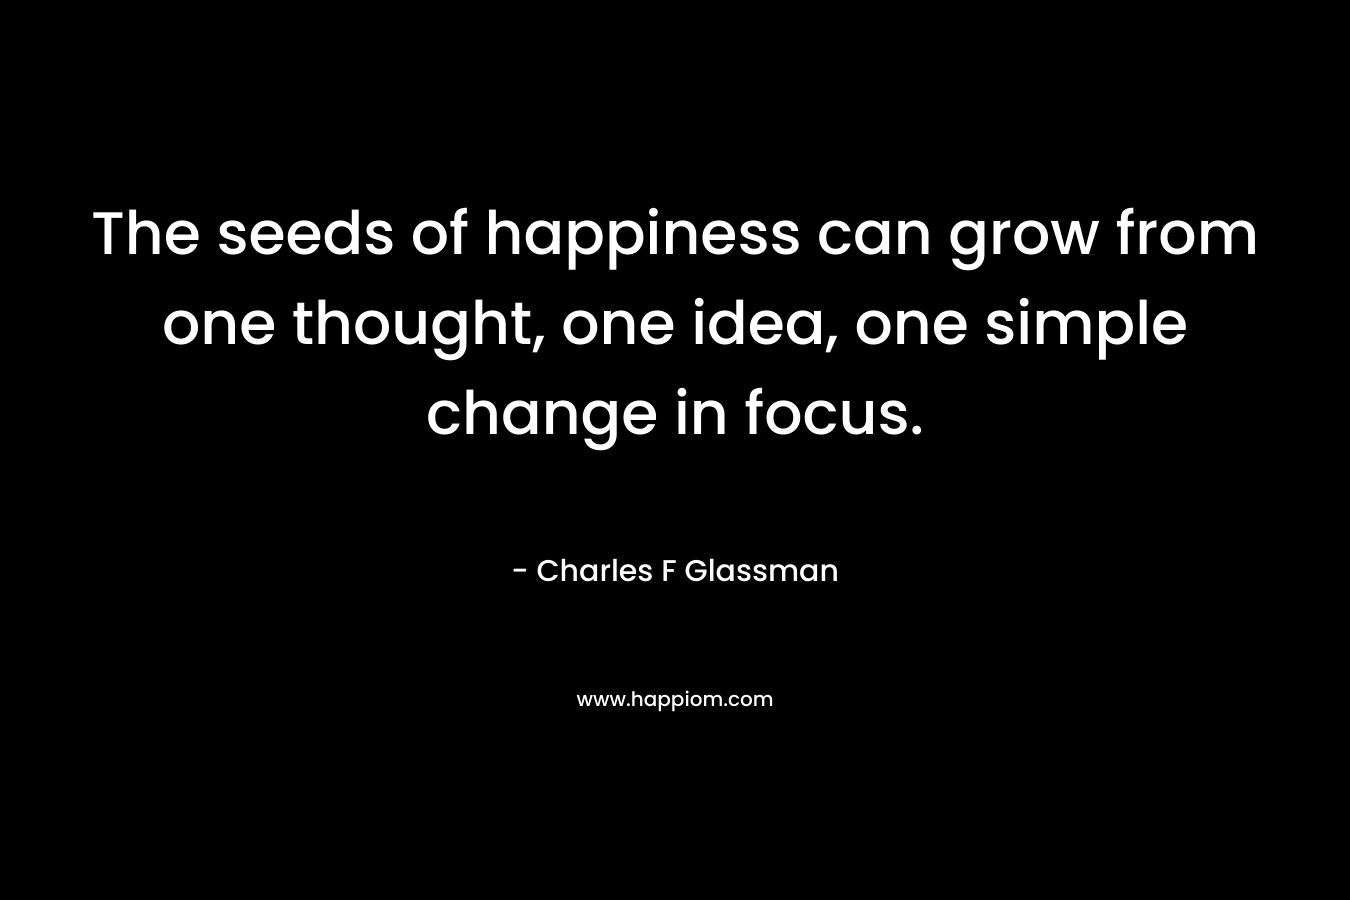 The seeds of happiness can grow from one thought, one idea, one simple change in focus.